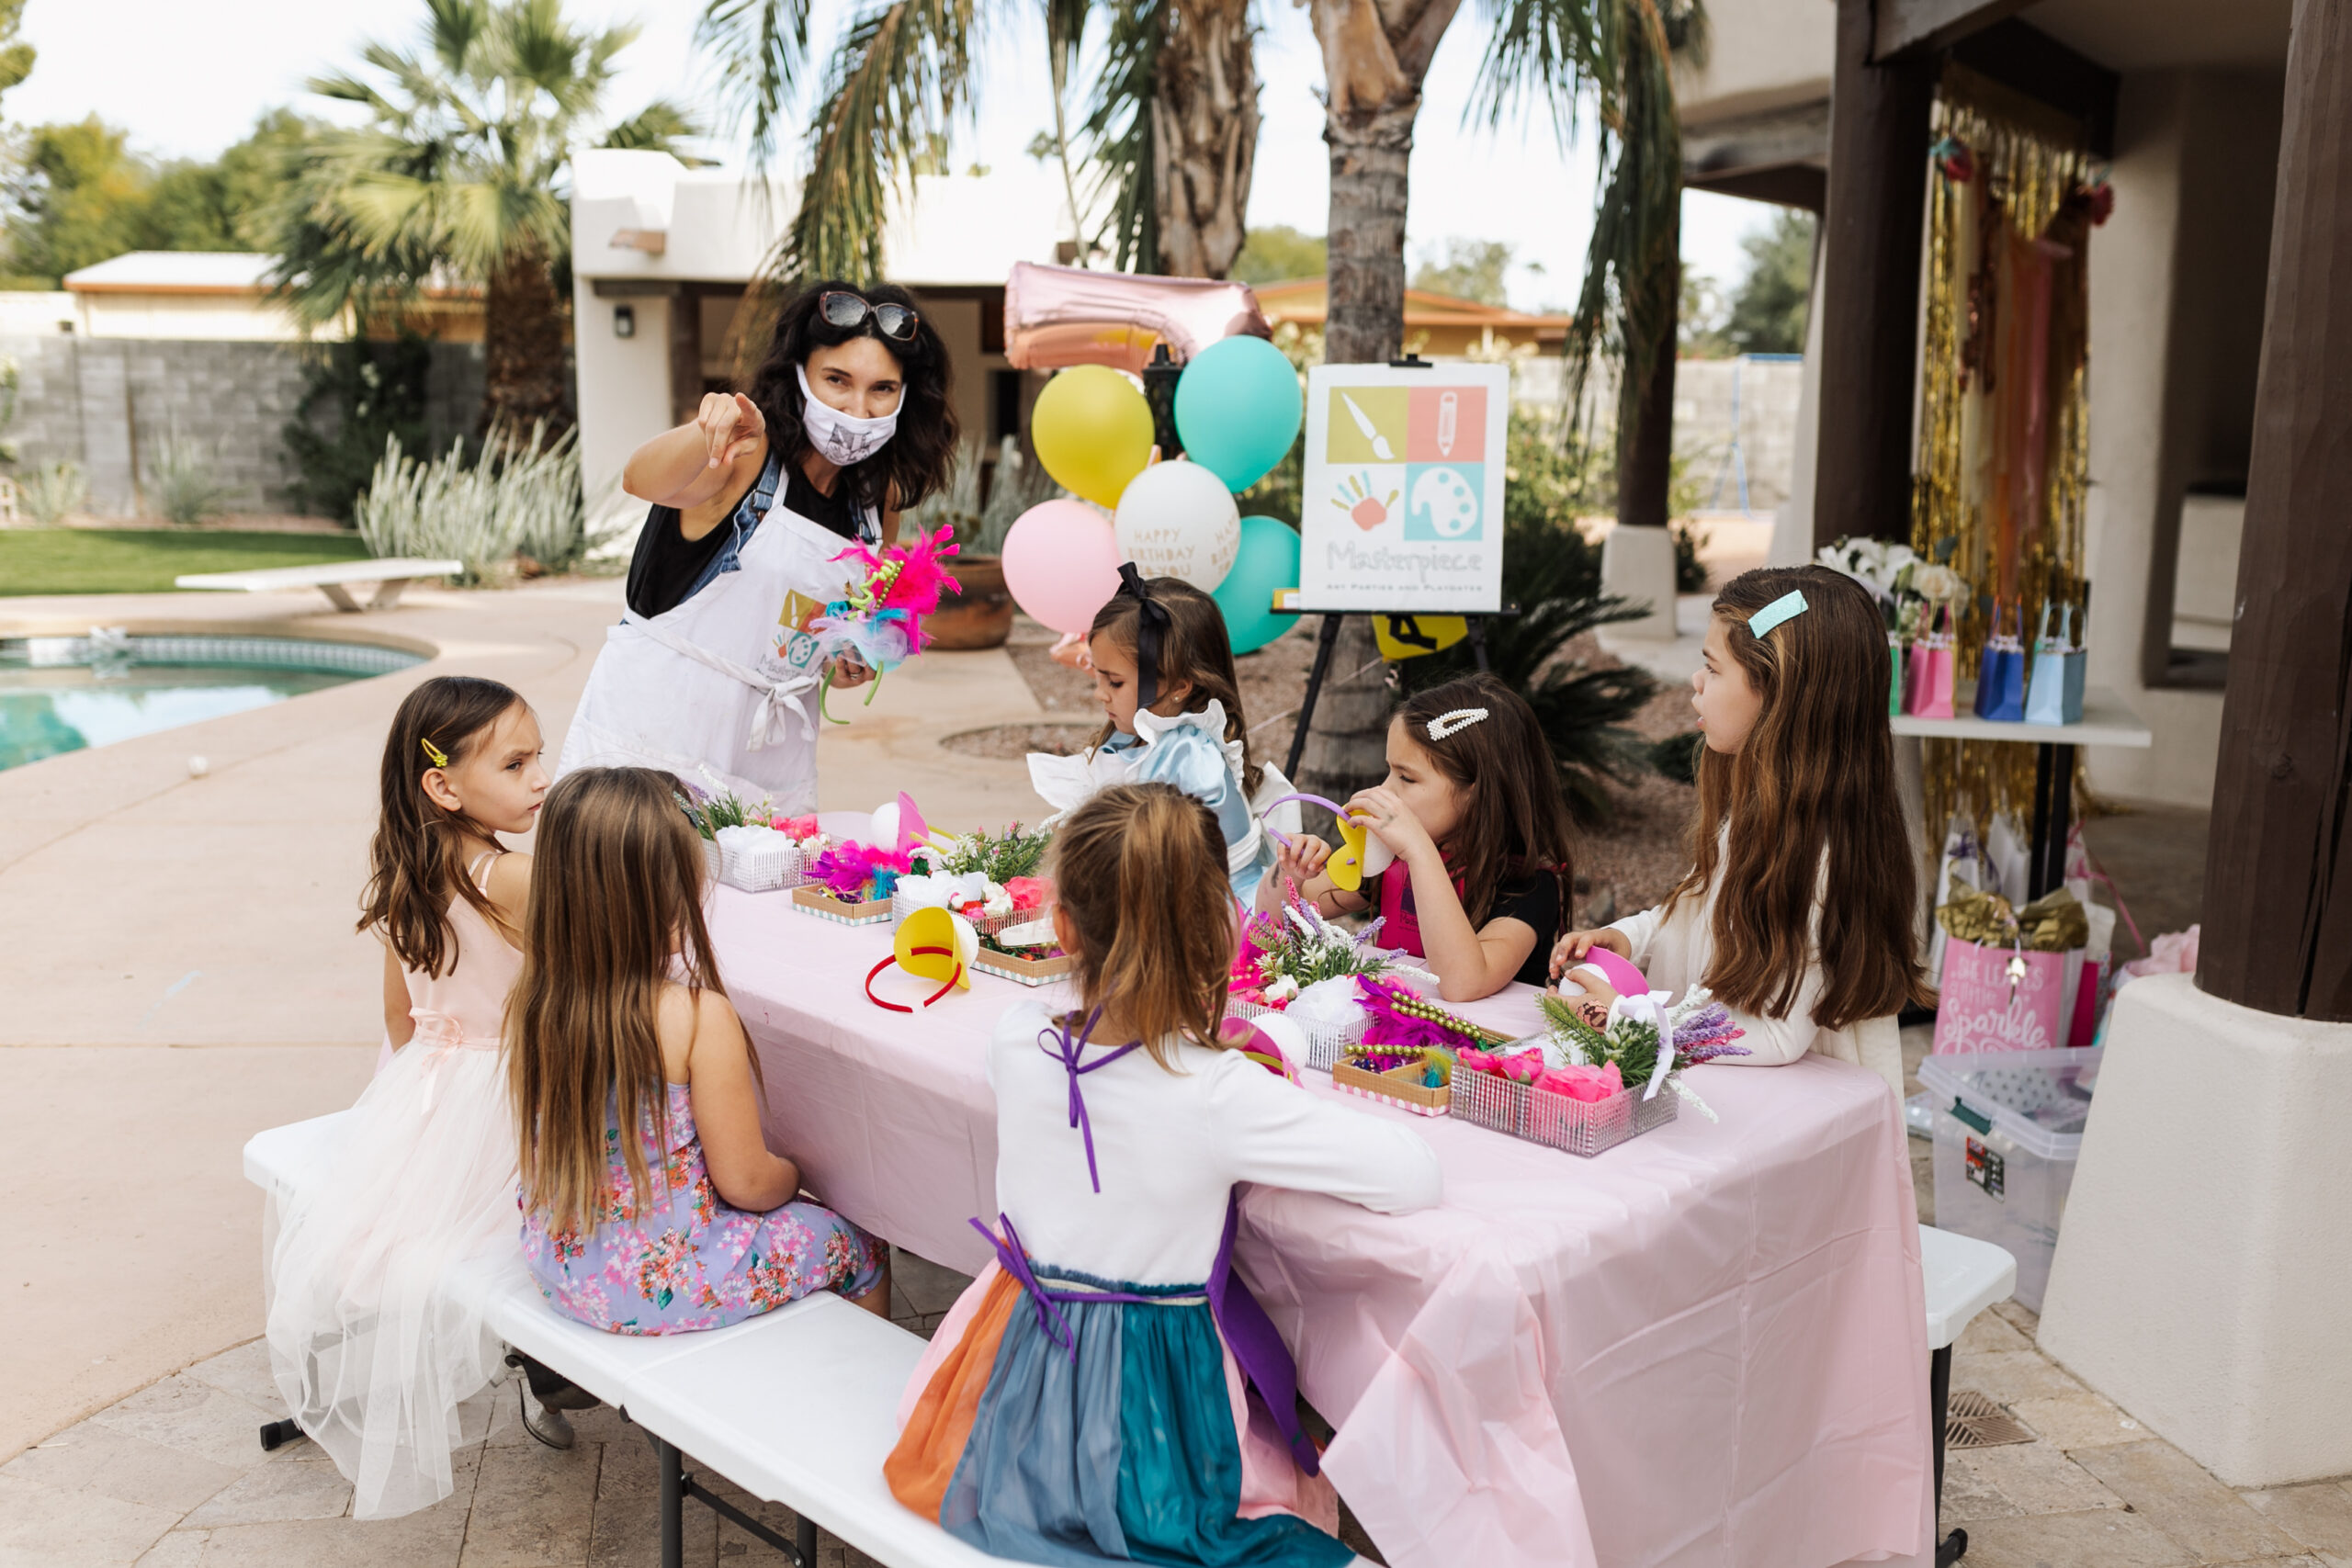 masterpiece art parties with a mad hatter craft for the girls! #thelovedesignedlife #masterpieceartparties #madhatterteaparty